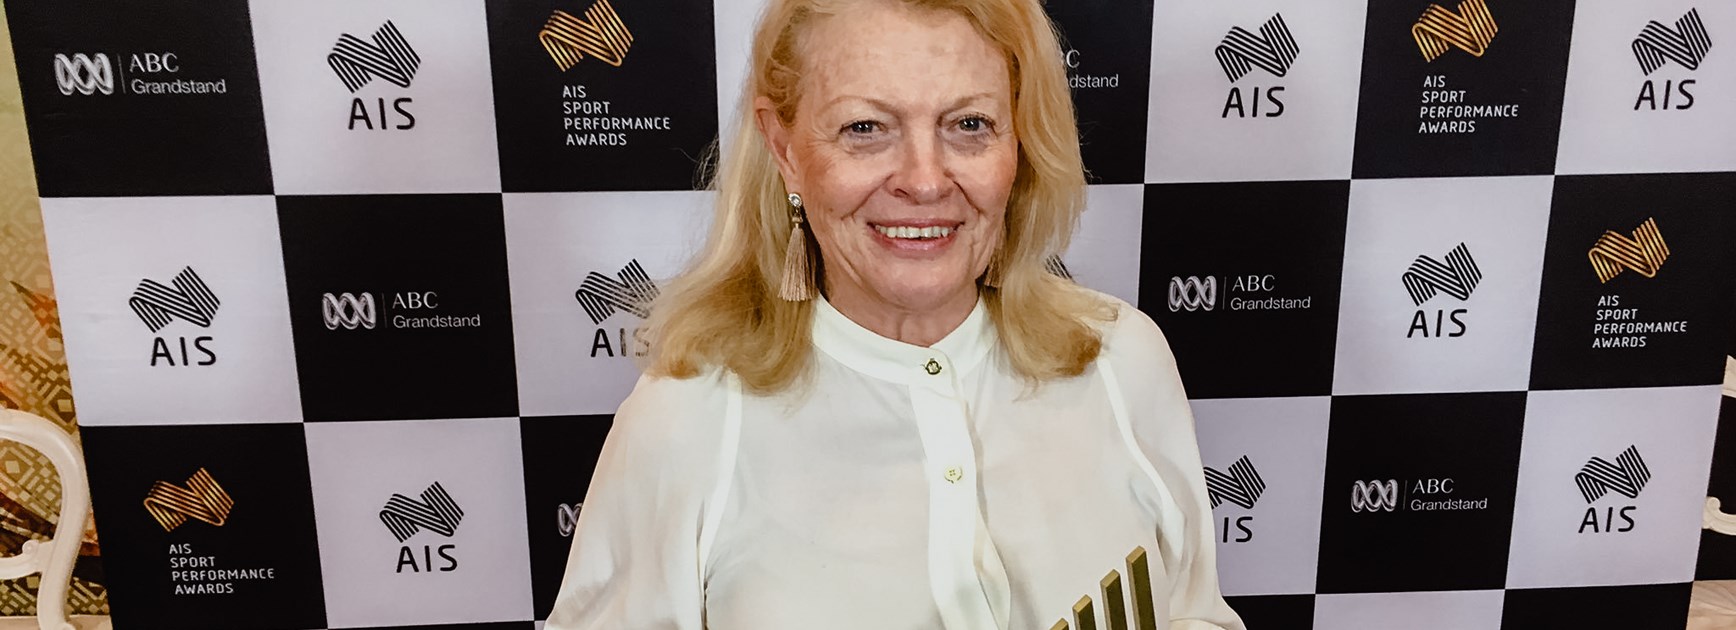 Lynne Anderson receives the AIS – Award for Leadership